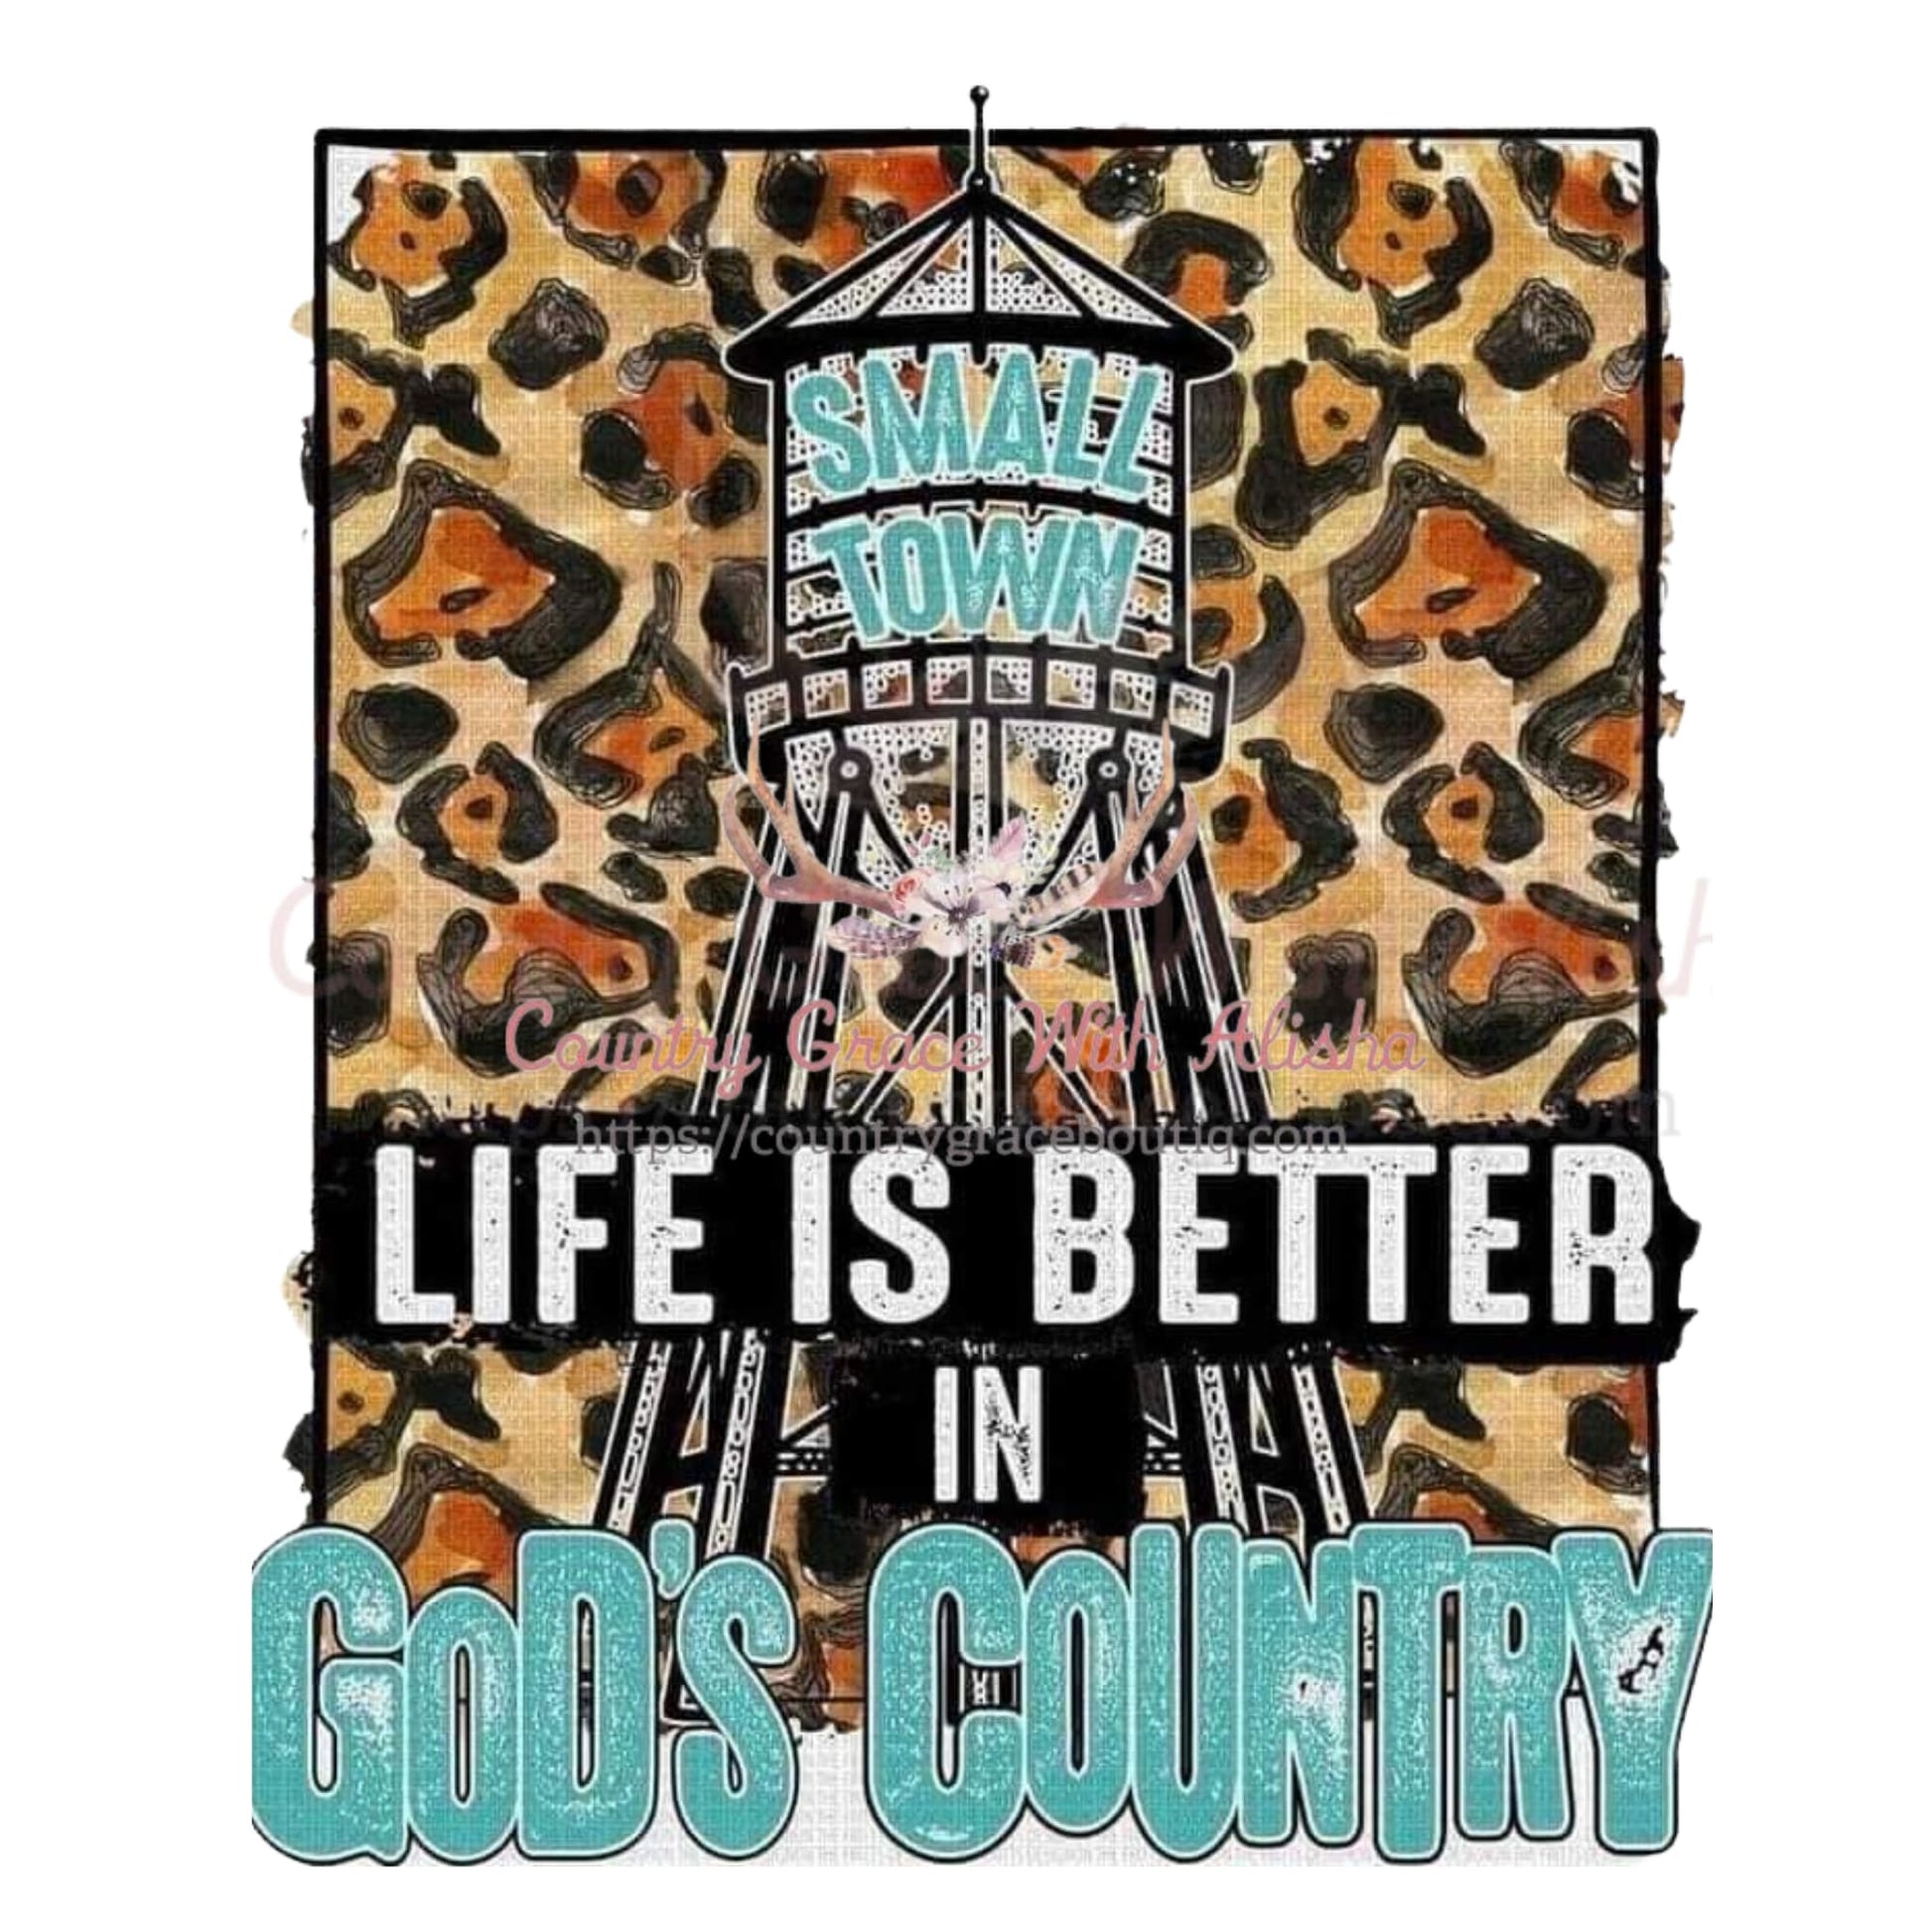 Life Is Better In Gods Country Sublimation Transfer - Sub 